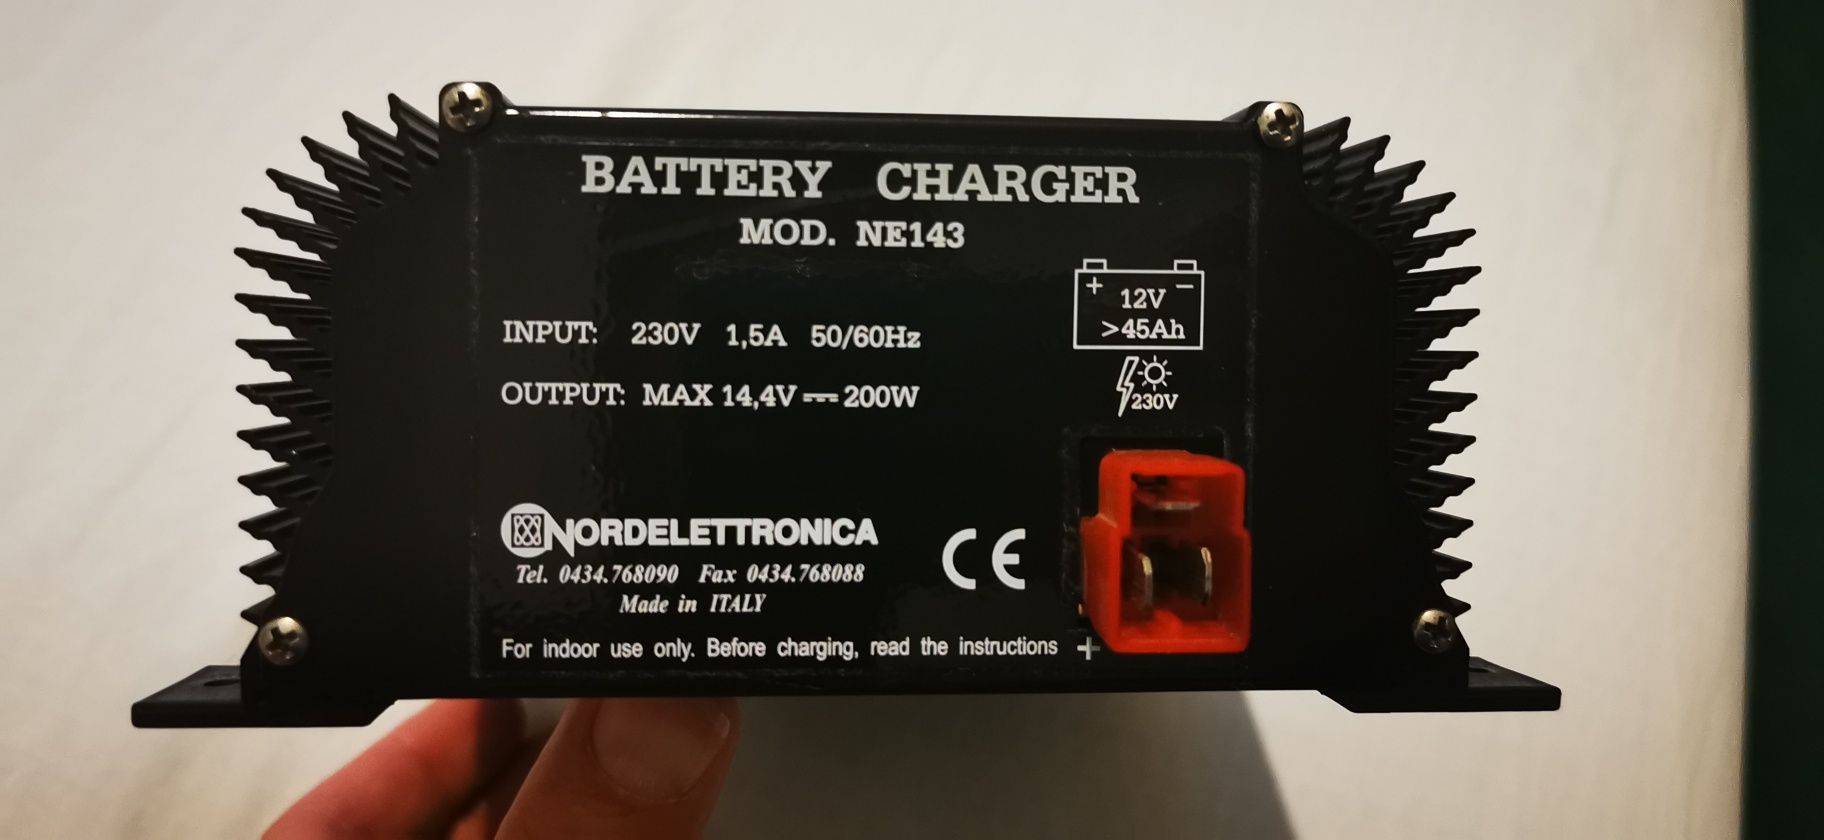 Prostownik battery charger